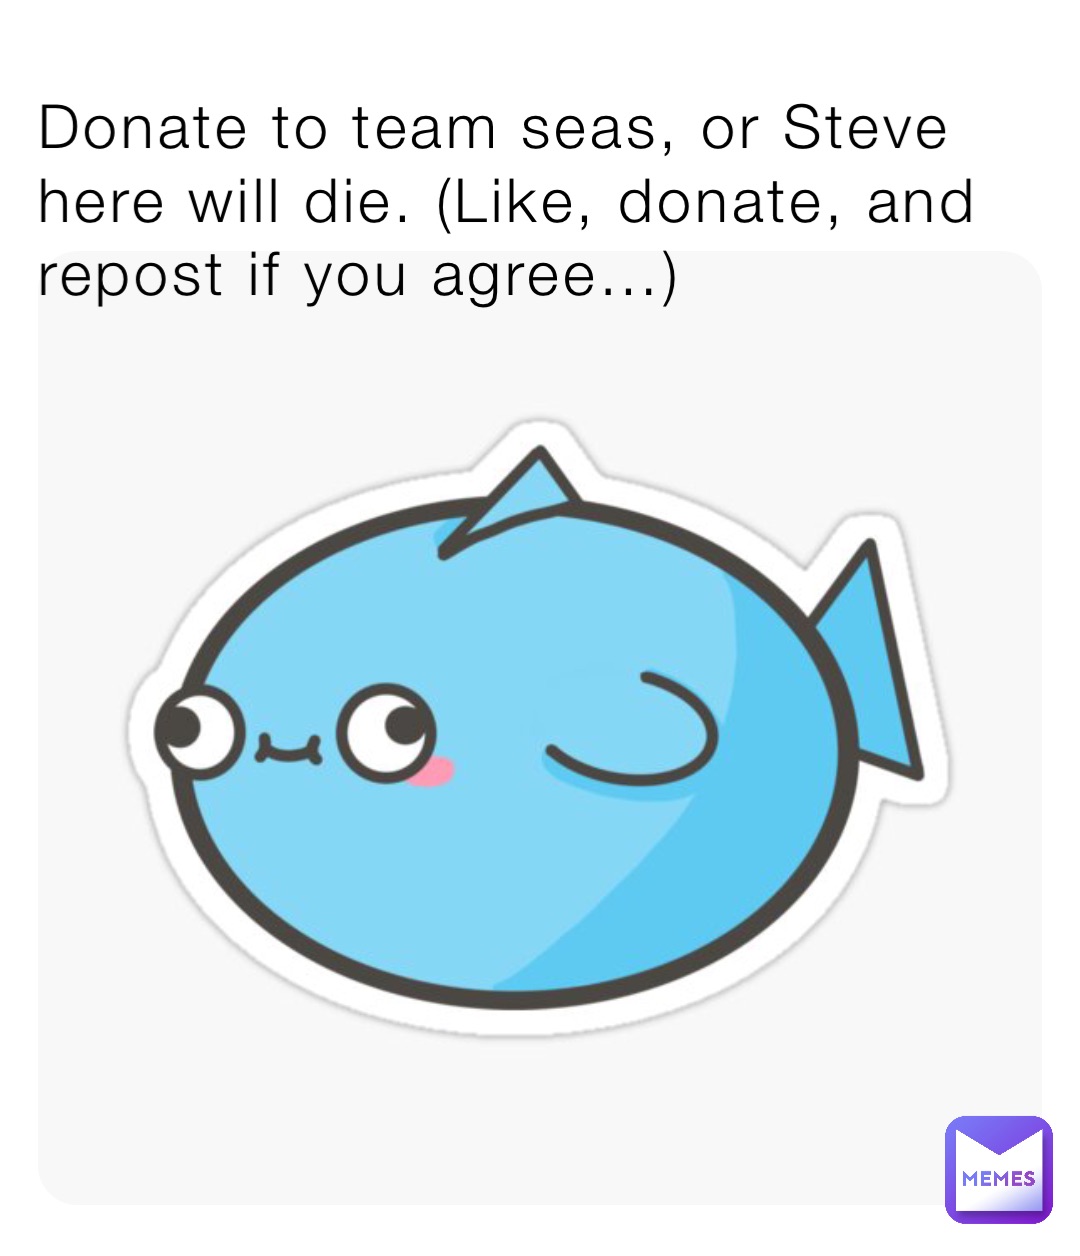 Donate to team seas, or Steve here will die. (Like, donate, and repost if you agree…)